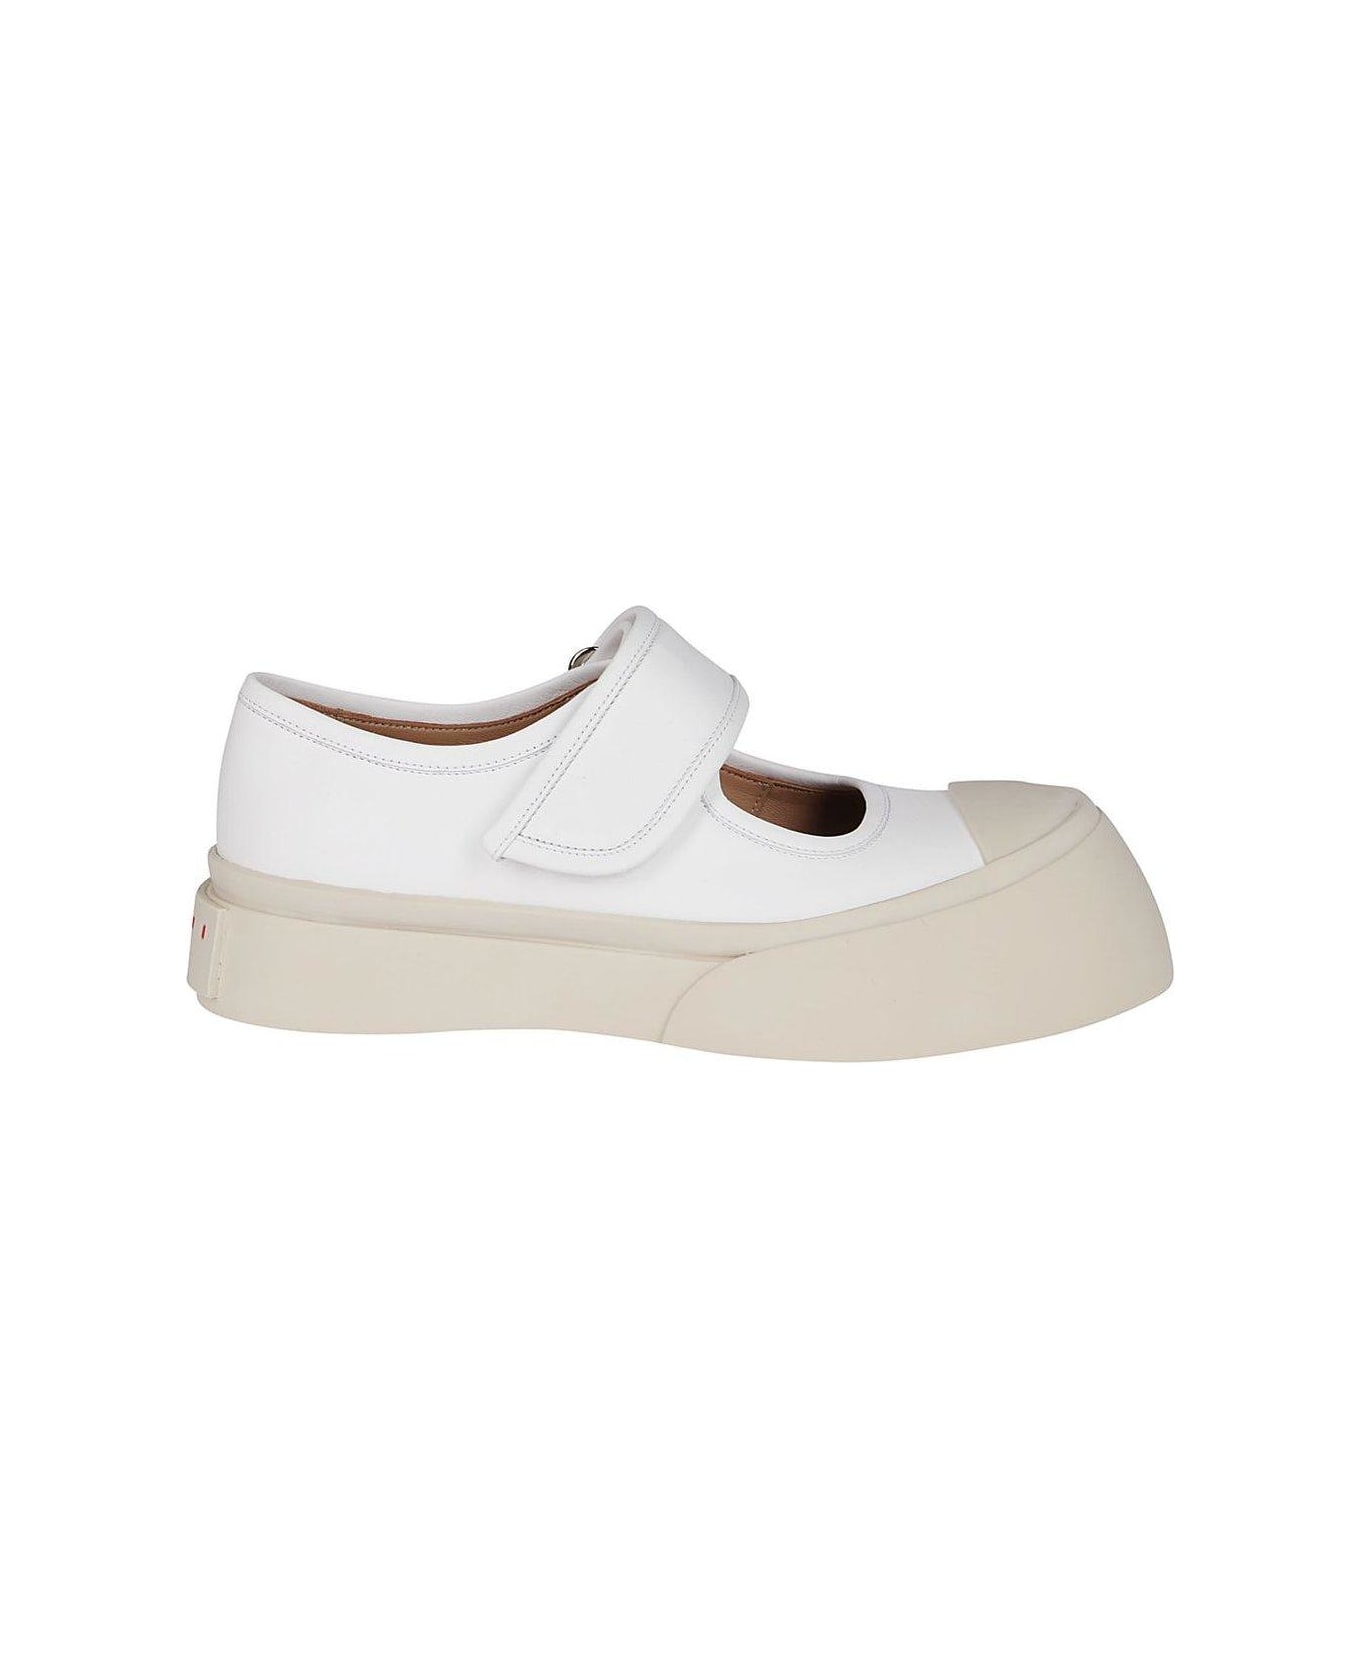 Marni Pablo Touch Strap Low Top Sneakers - 00W01 スニーカー